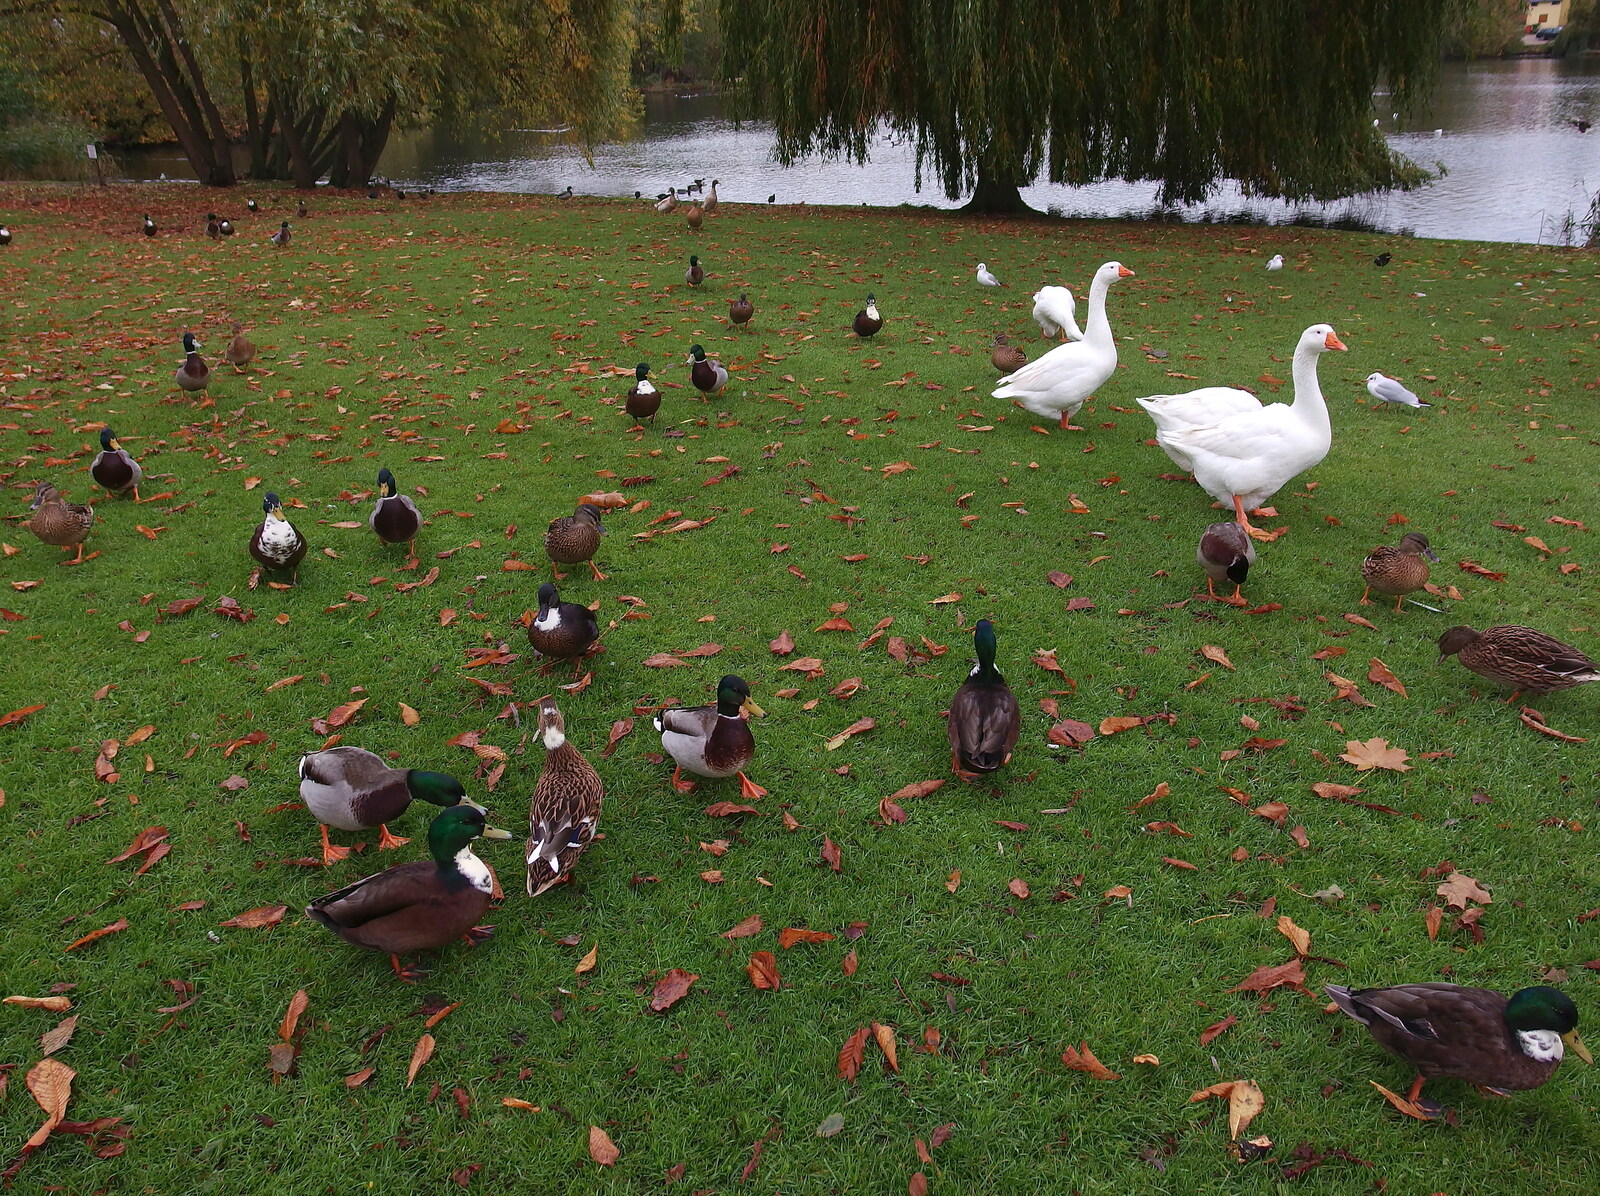 A November Miscellany and Building Progress, Thornham and Brome, Suffolk - 17th November 2013: Ducks and geese in the park